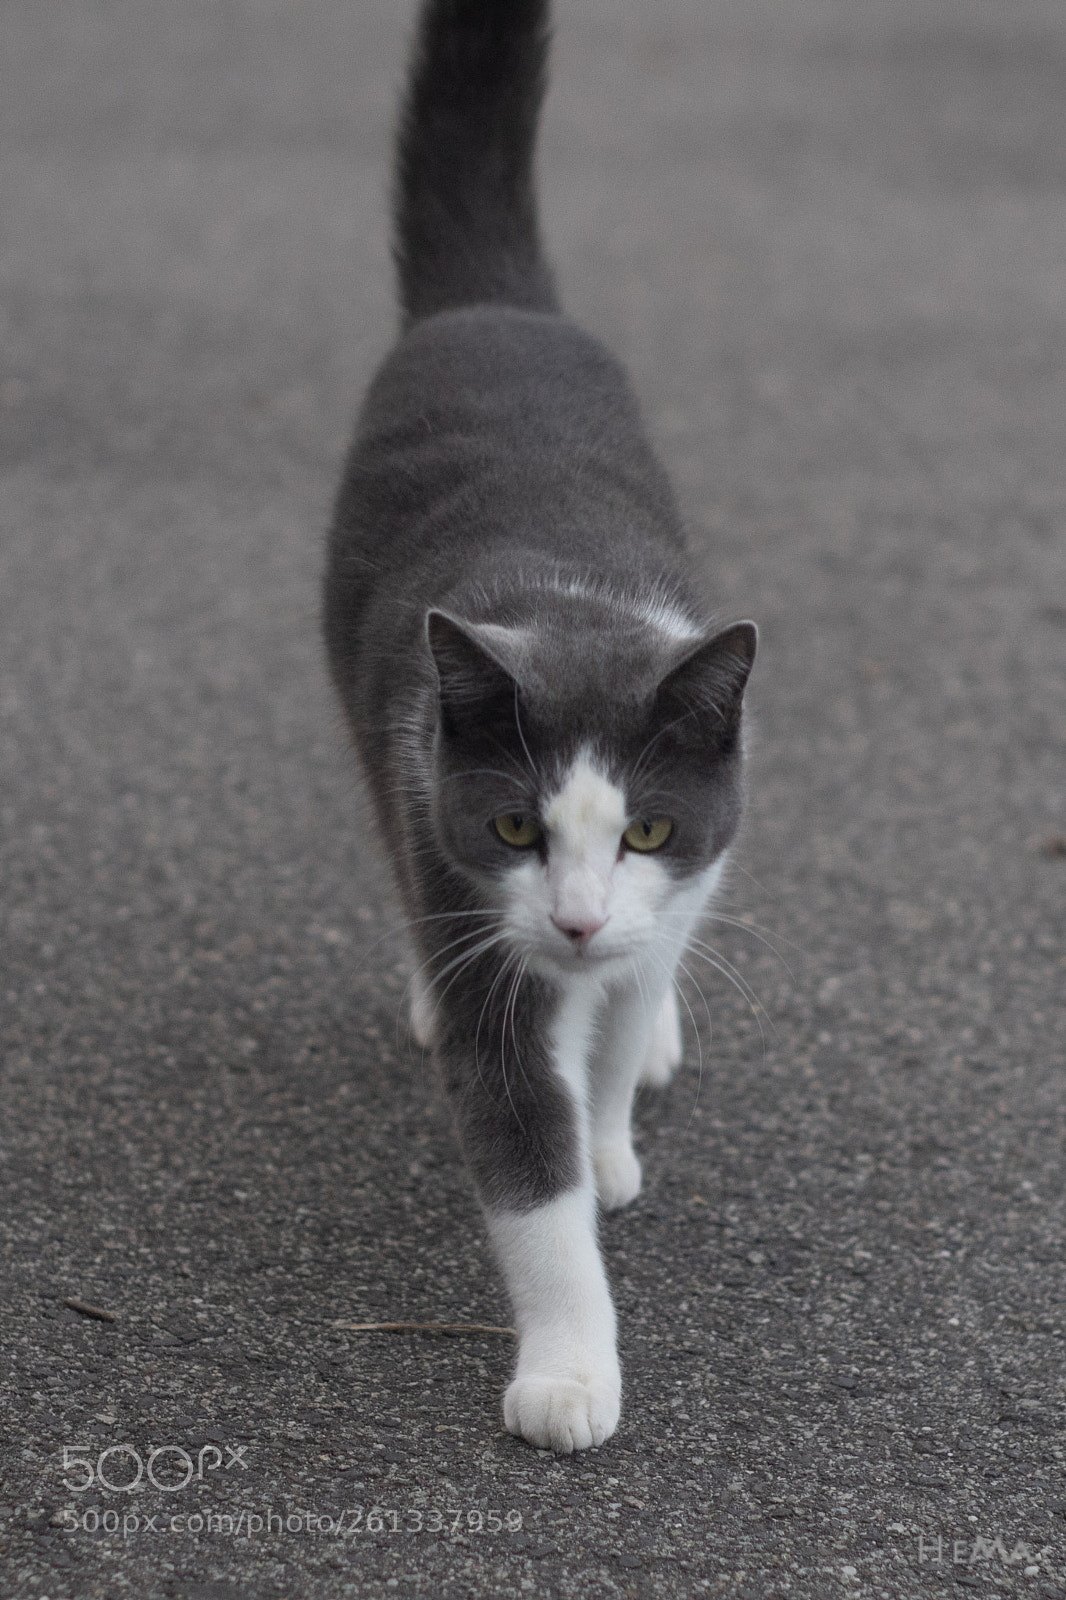 Pentax K-S2 sample photo. Encountering a cat photography